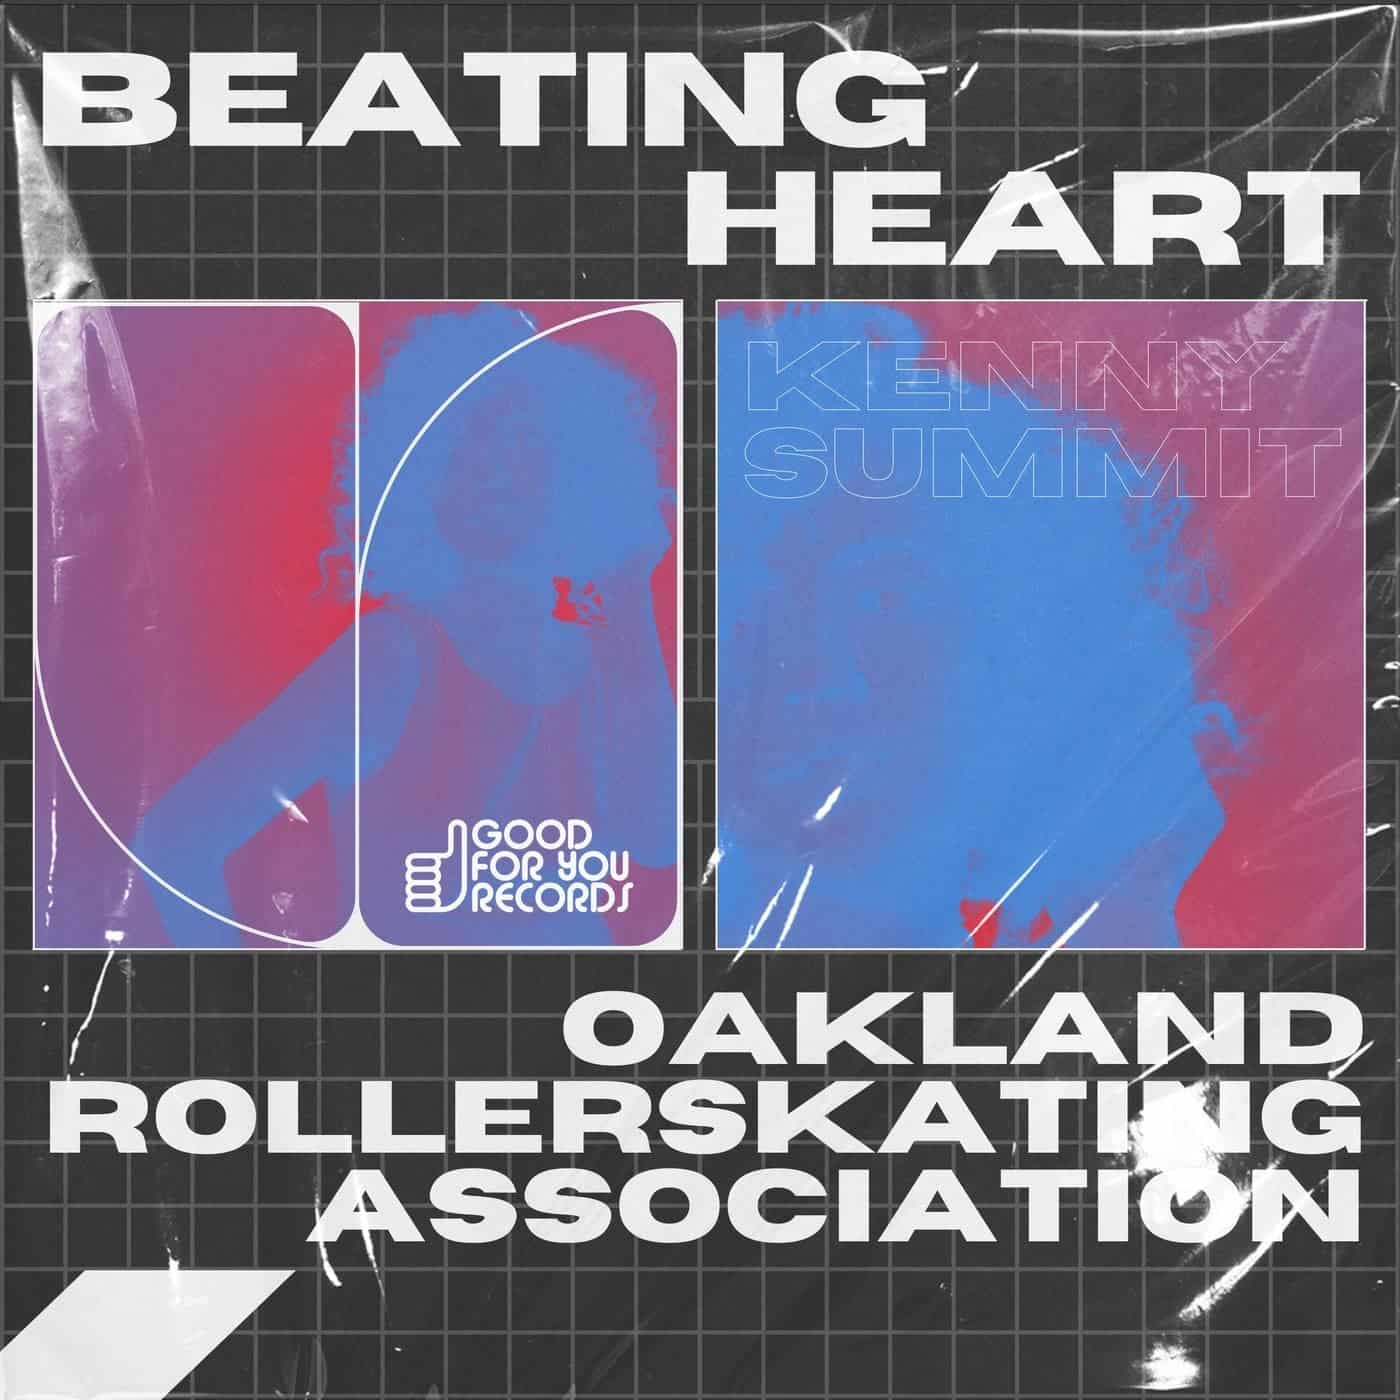 Download Kenny Summit - Beating Heart on Electrobuzz